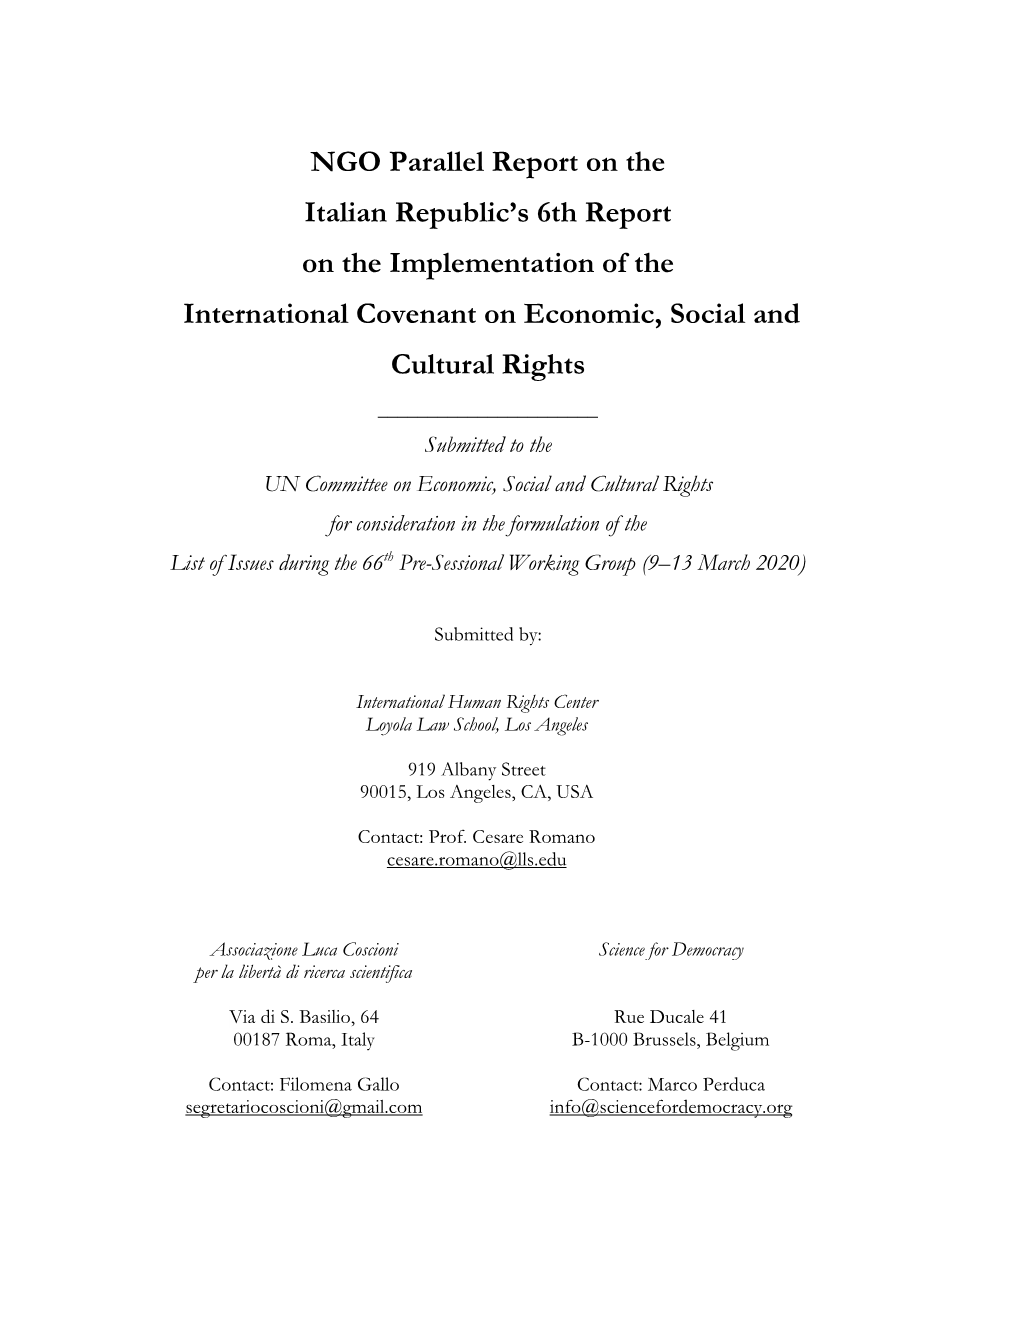 NGO Parallel Report on the Italian Republic's 6Th Report on The